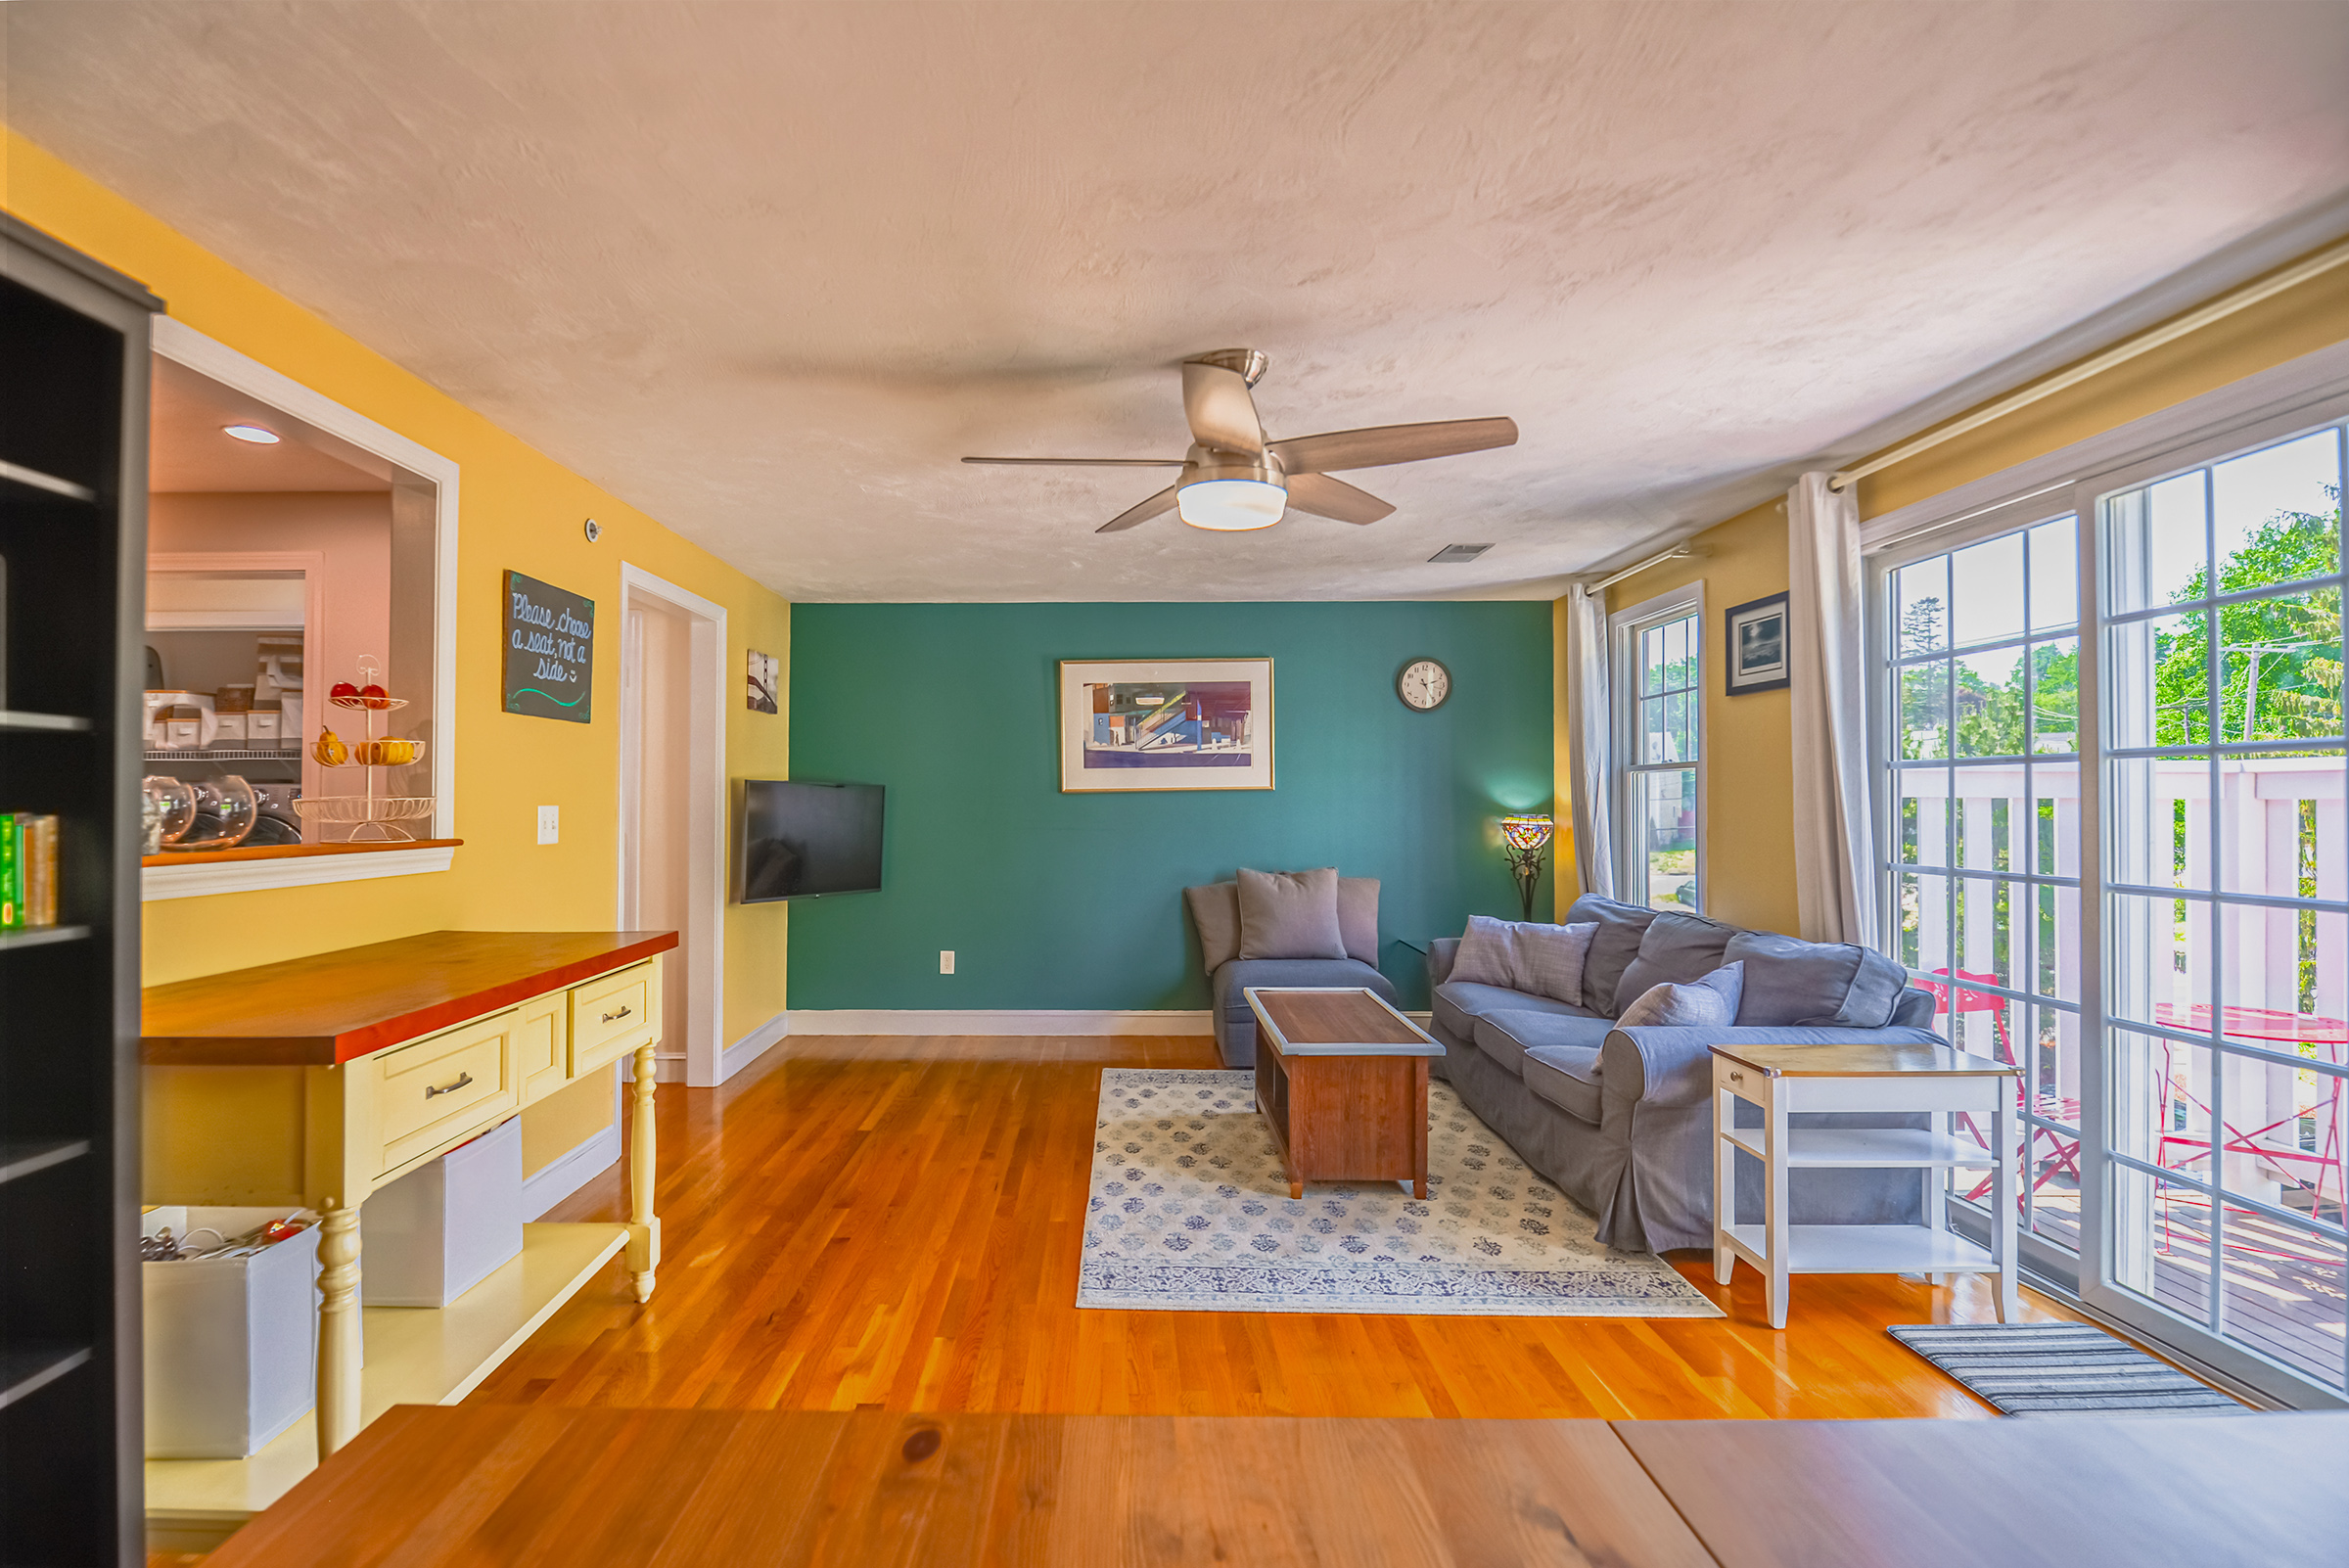 For Sale: 41 Water Street #3A - Weymouth